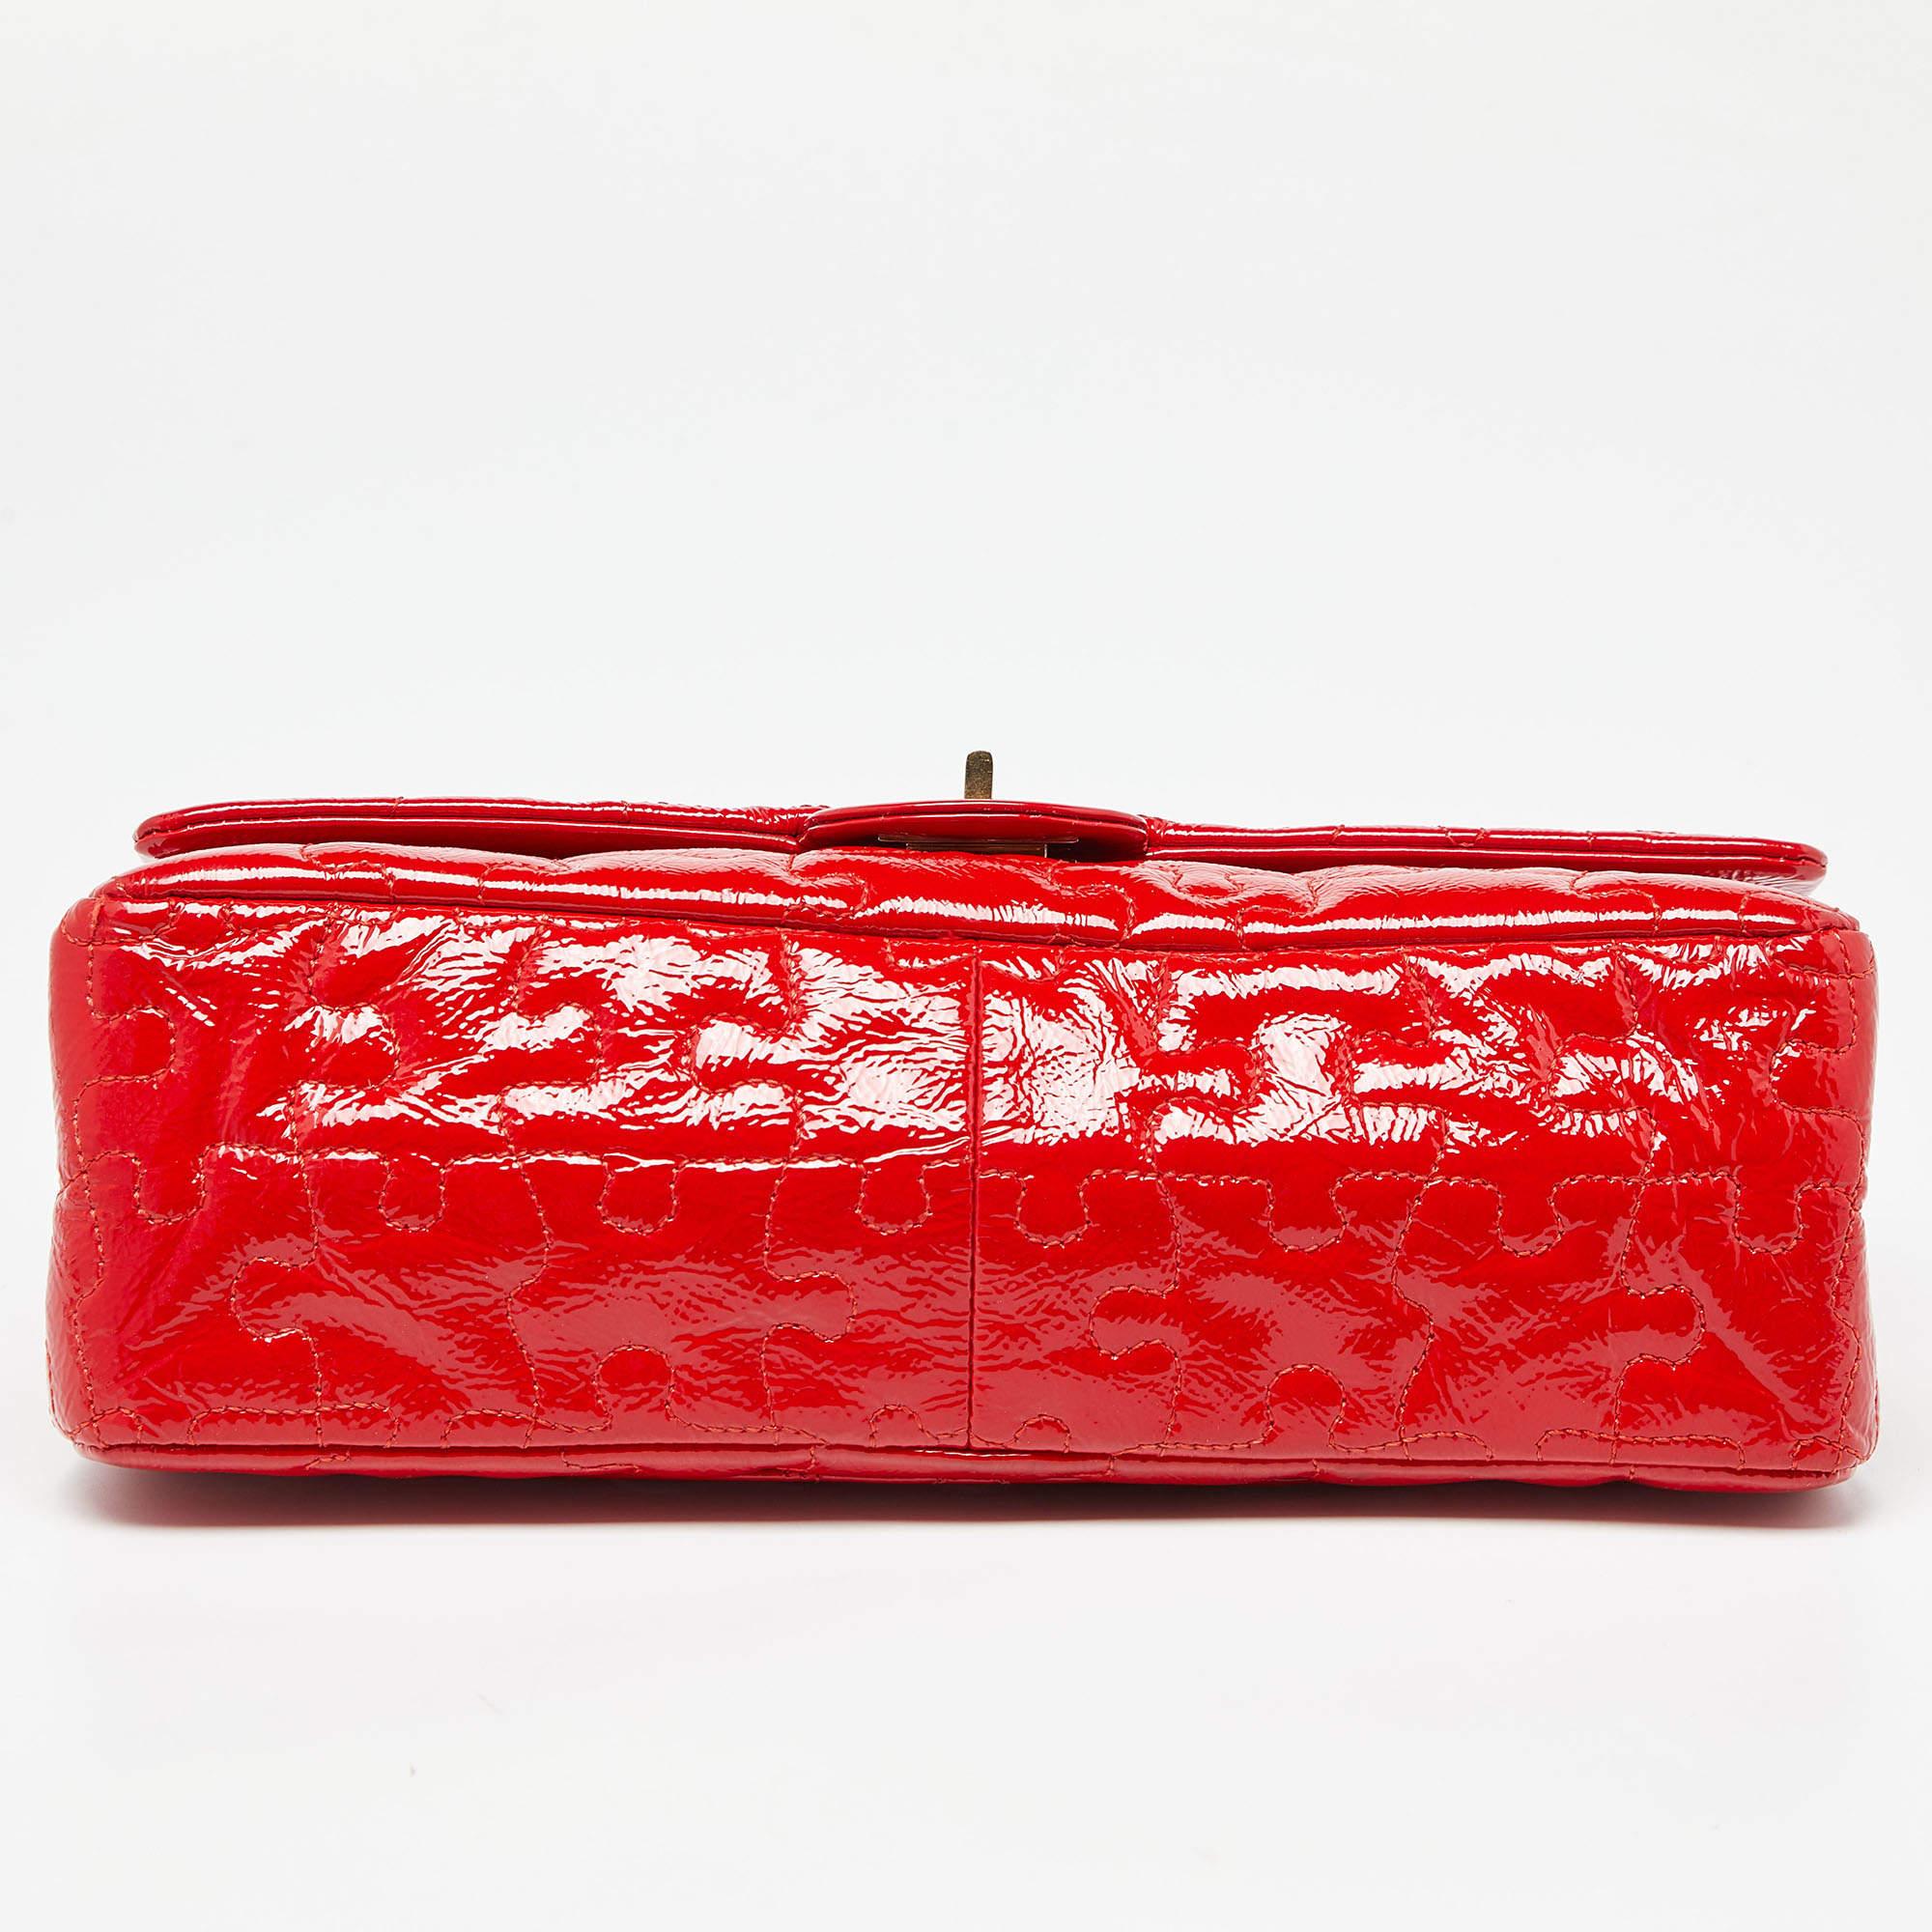 Chanel Red Puzzle Patent Leather Classic 226 Reissue 2.55 Flap Bag For Sale 4